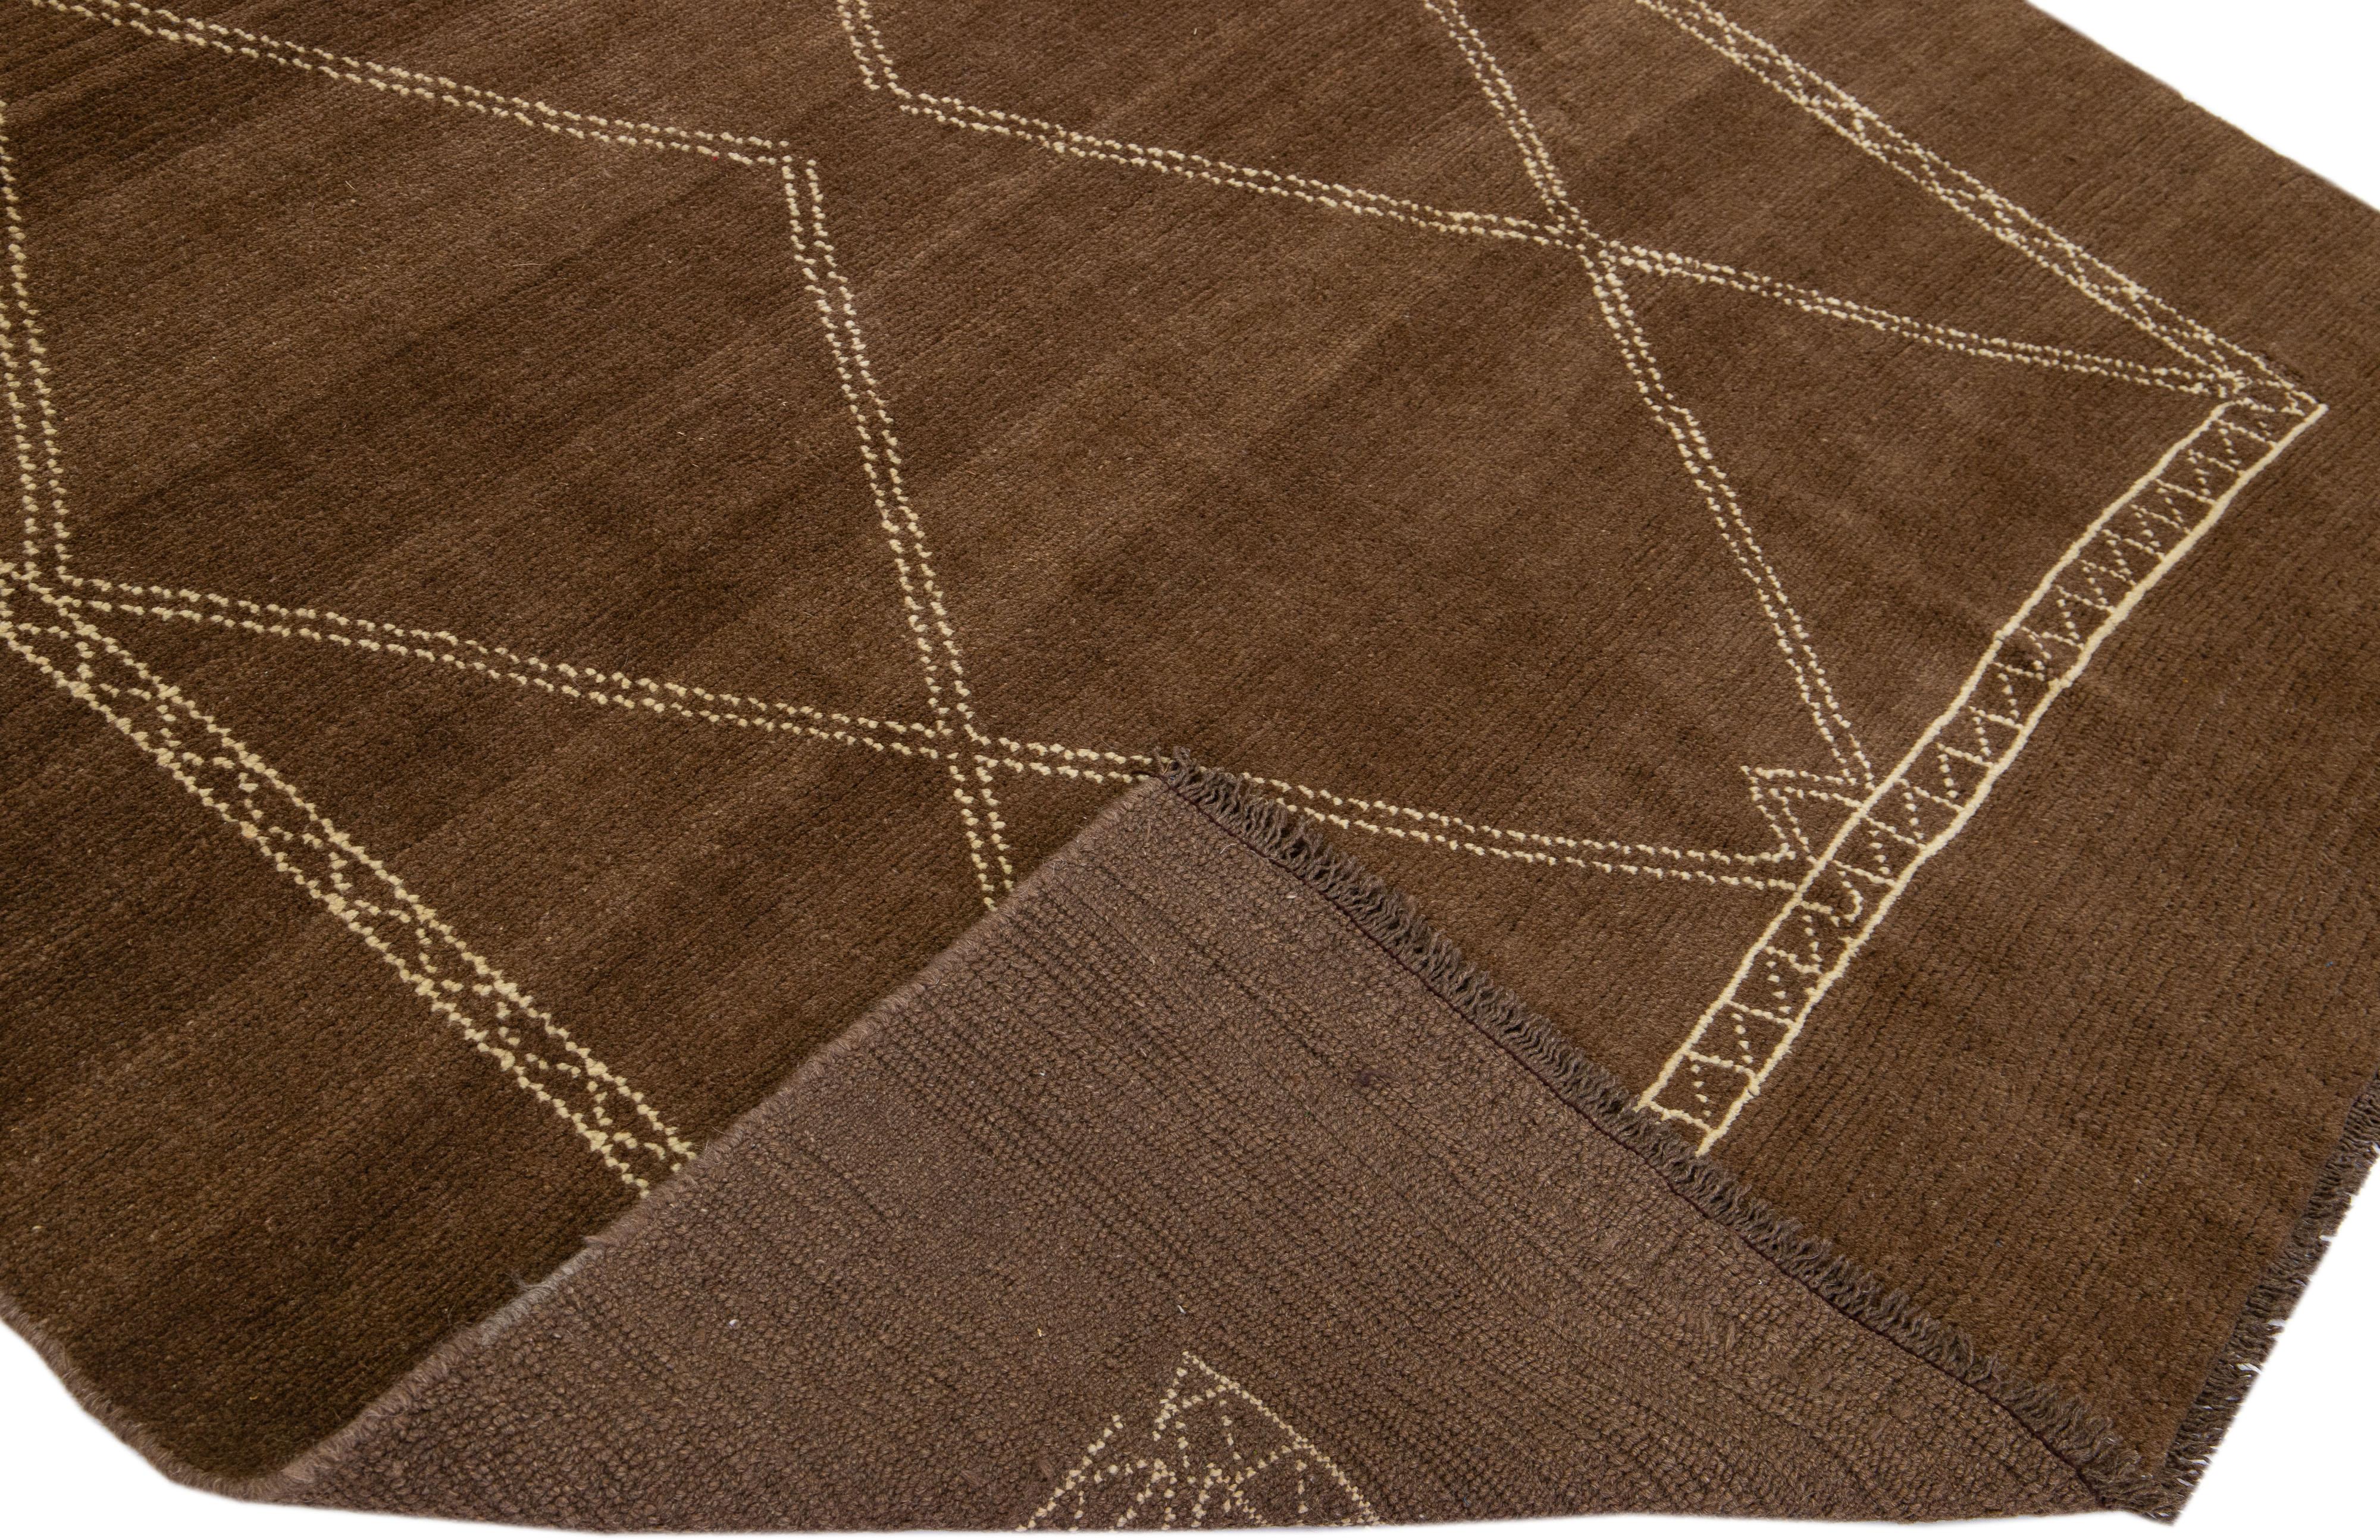 This Beautiful Moroccan-style handmade wool rug makes part of our Northwest collection and features a brown color field and beige accents in a gorgeous geometric tribal design.

This rug measures: 6'5